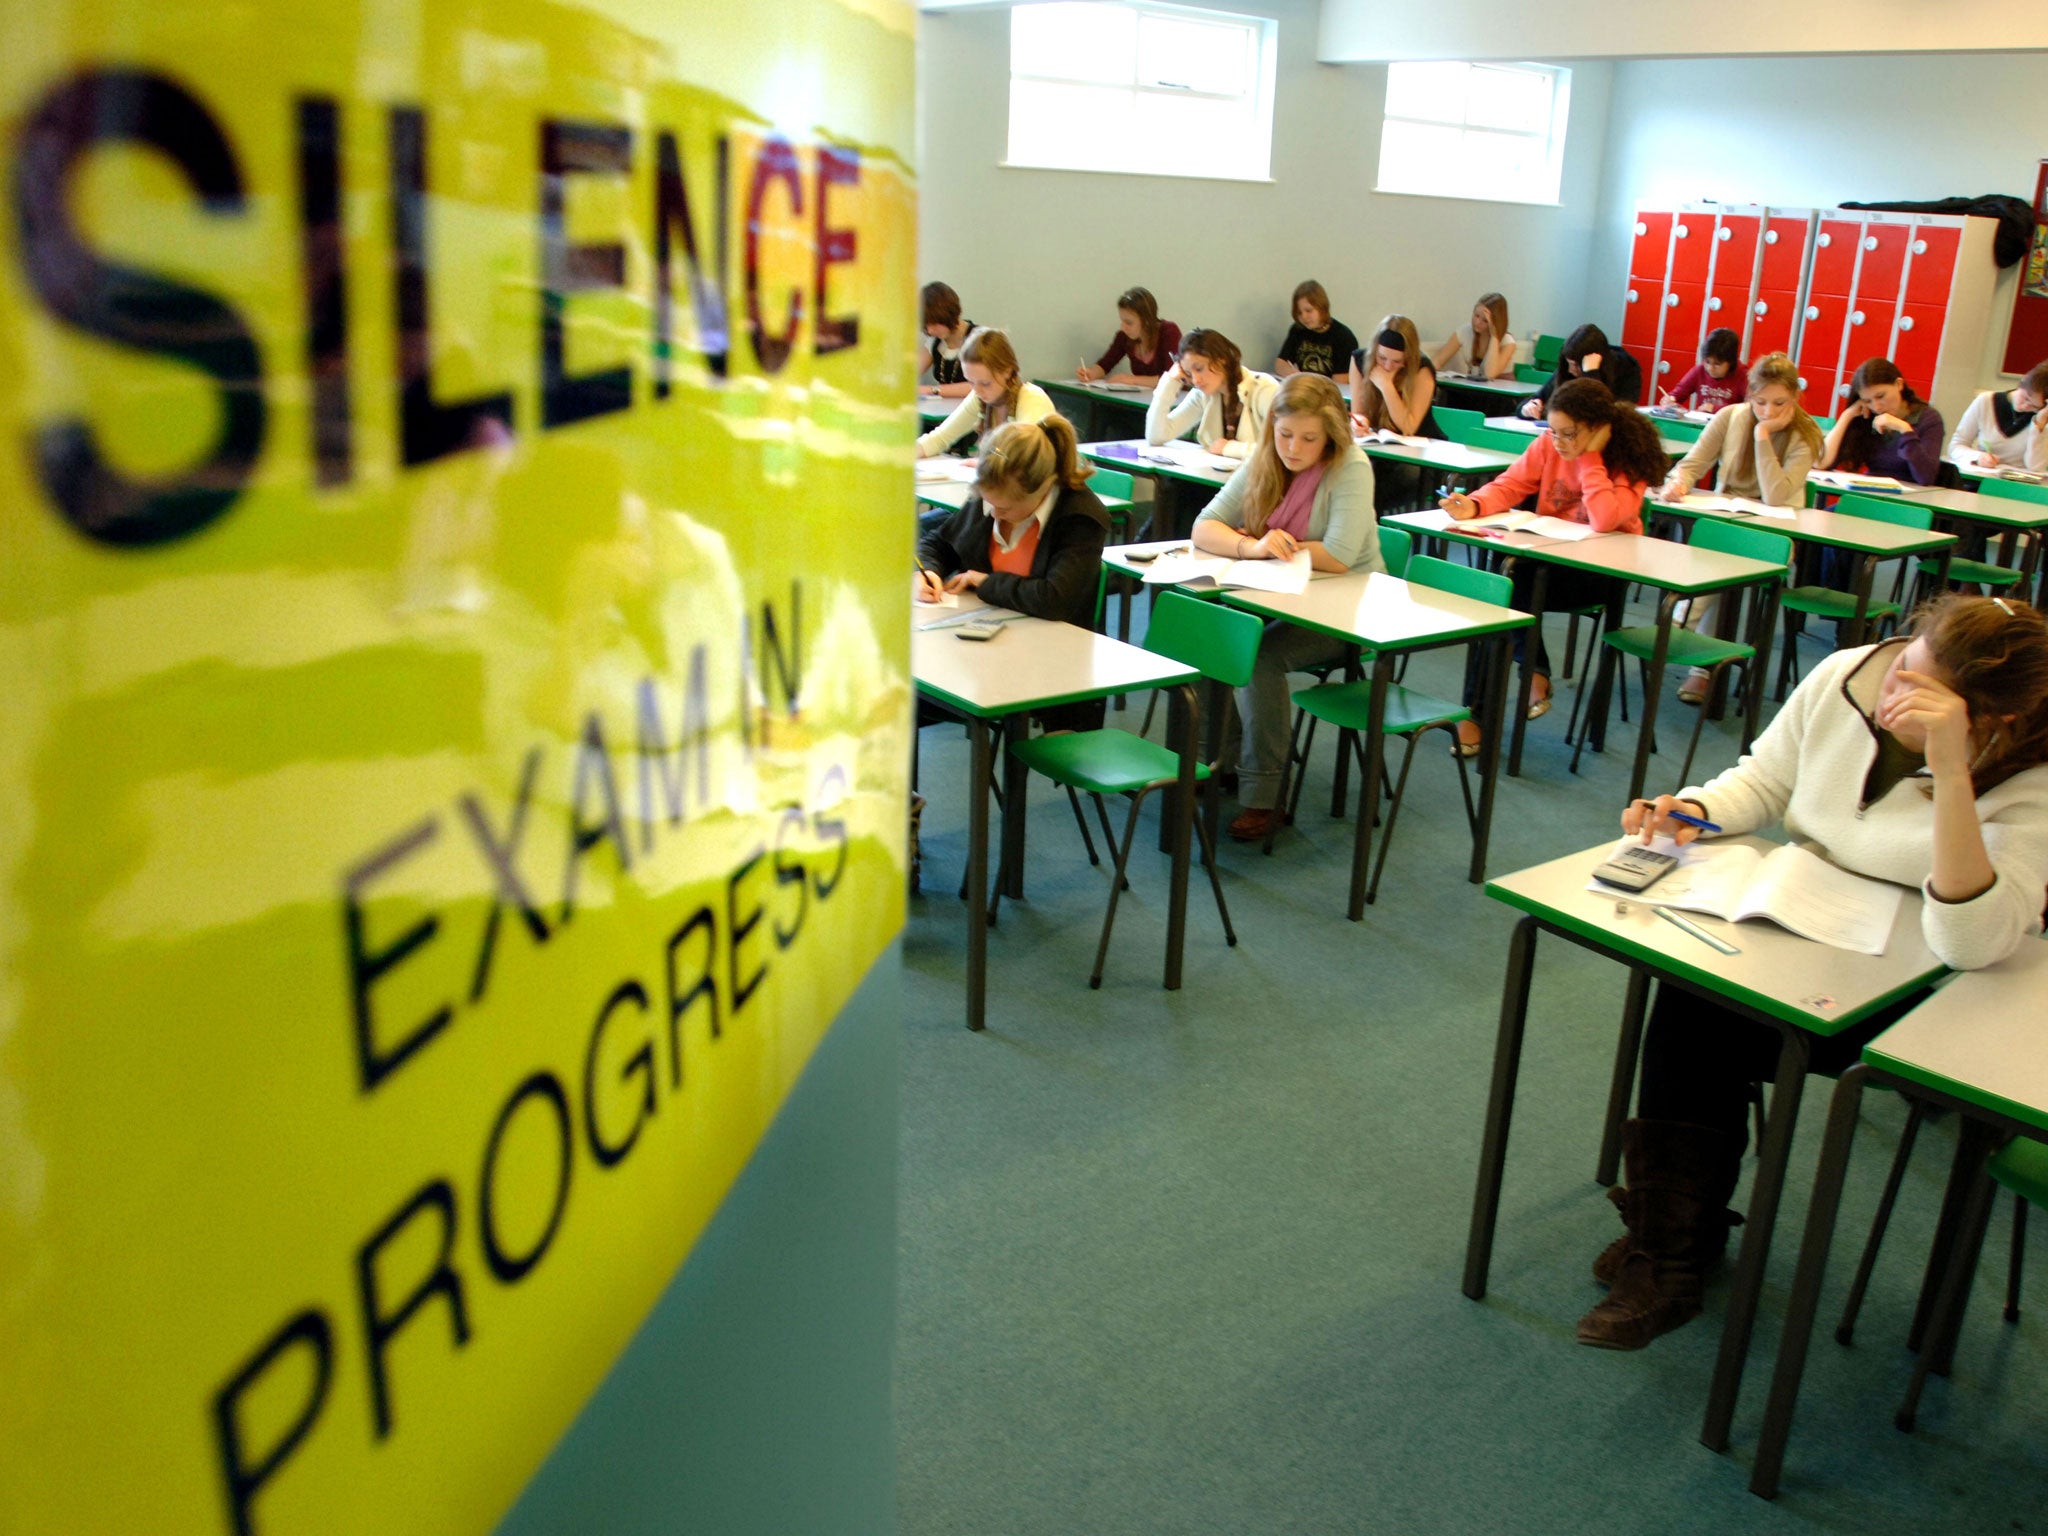 A Frenchwoman attempted to impersonate her daughter in an English exam